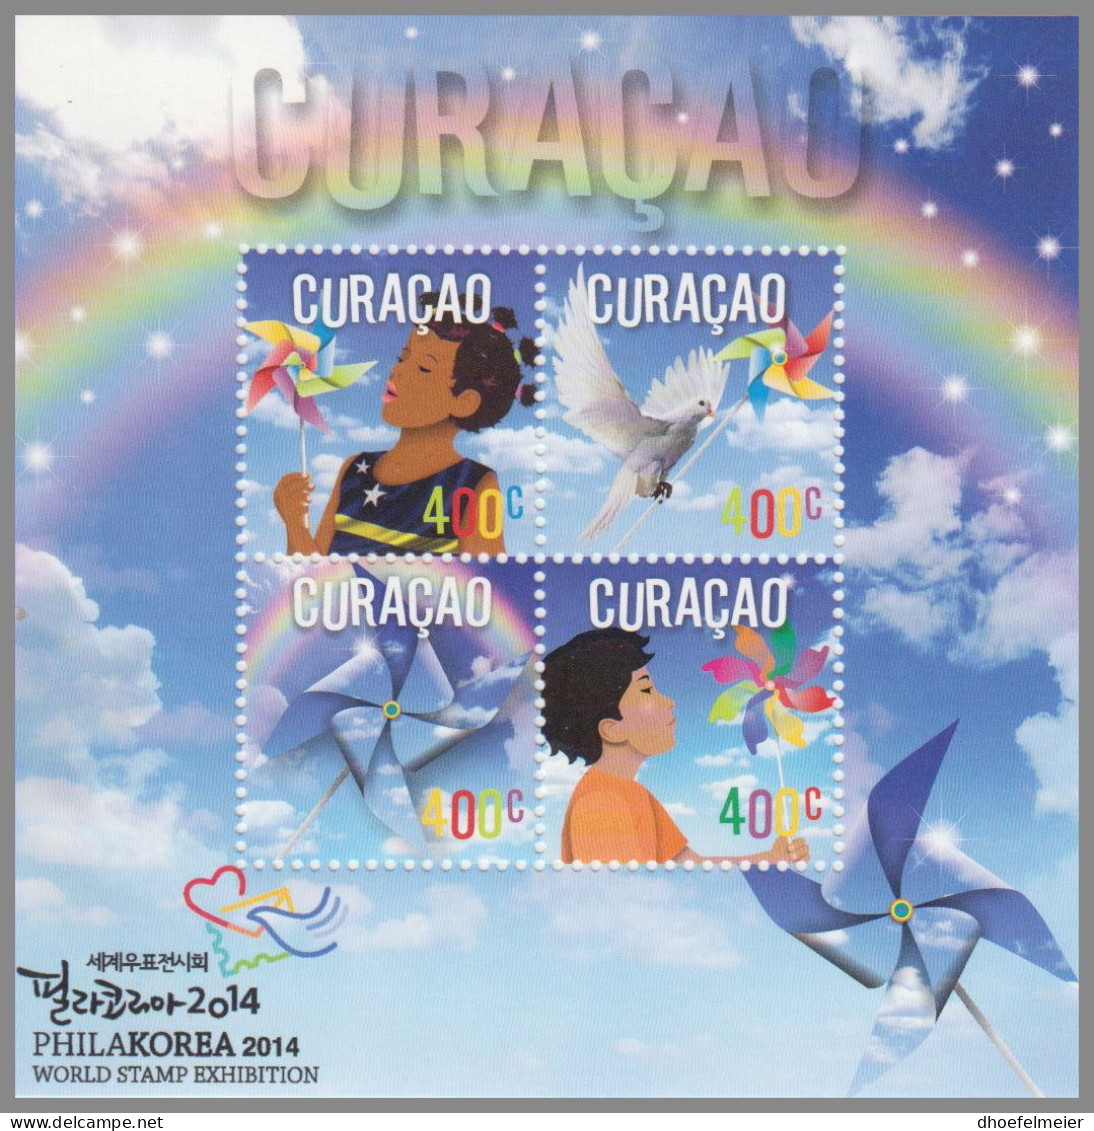 CURACAO 2014 MNH World Stamp Exhibition PHILAKOREA 2014 M/S – OFFICIAL ISSUE – DHQ49610 - Philatelic Exhibitions